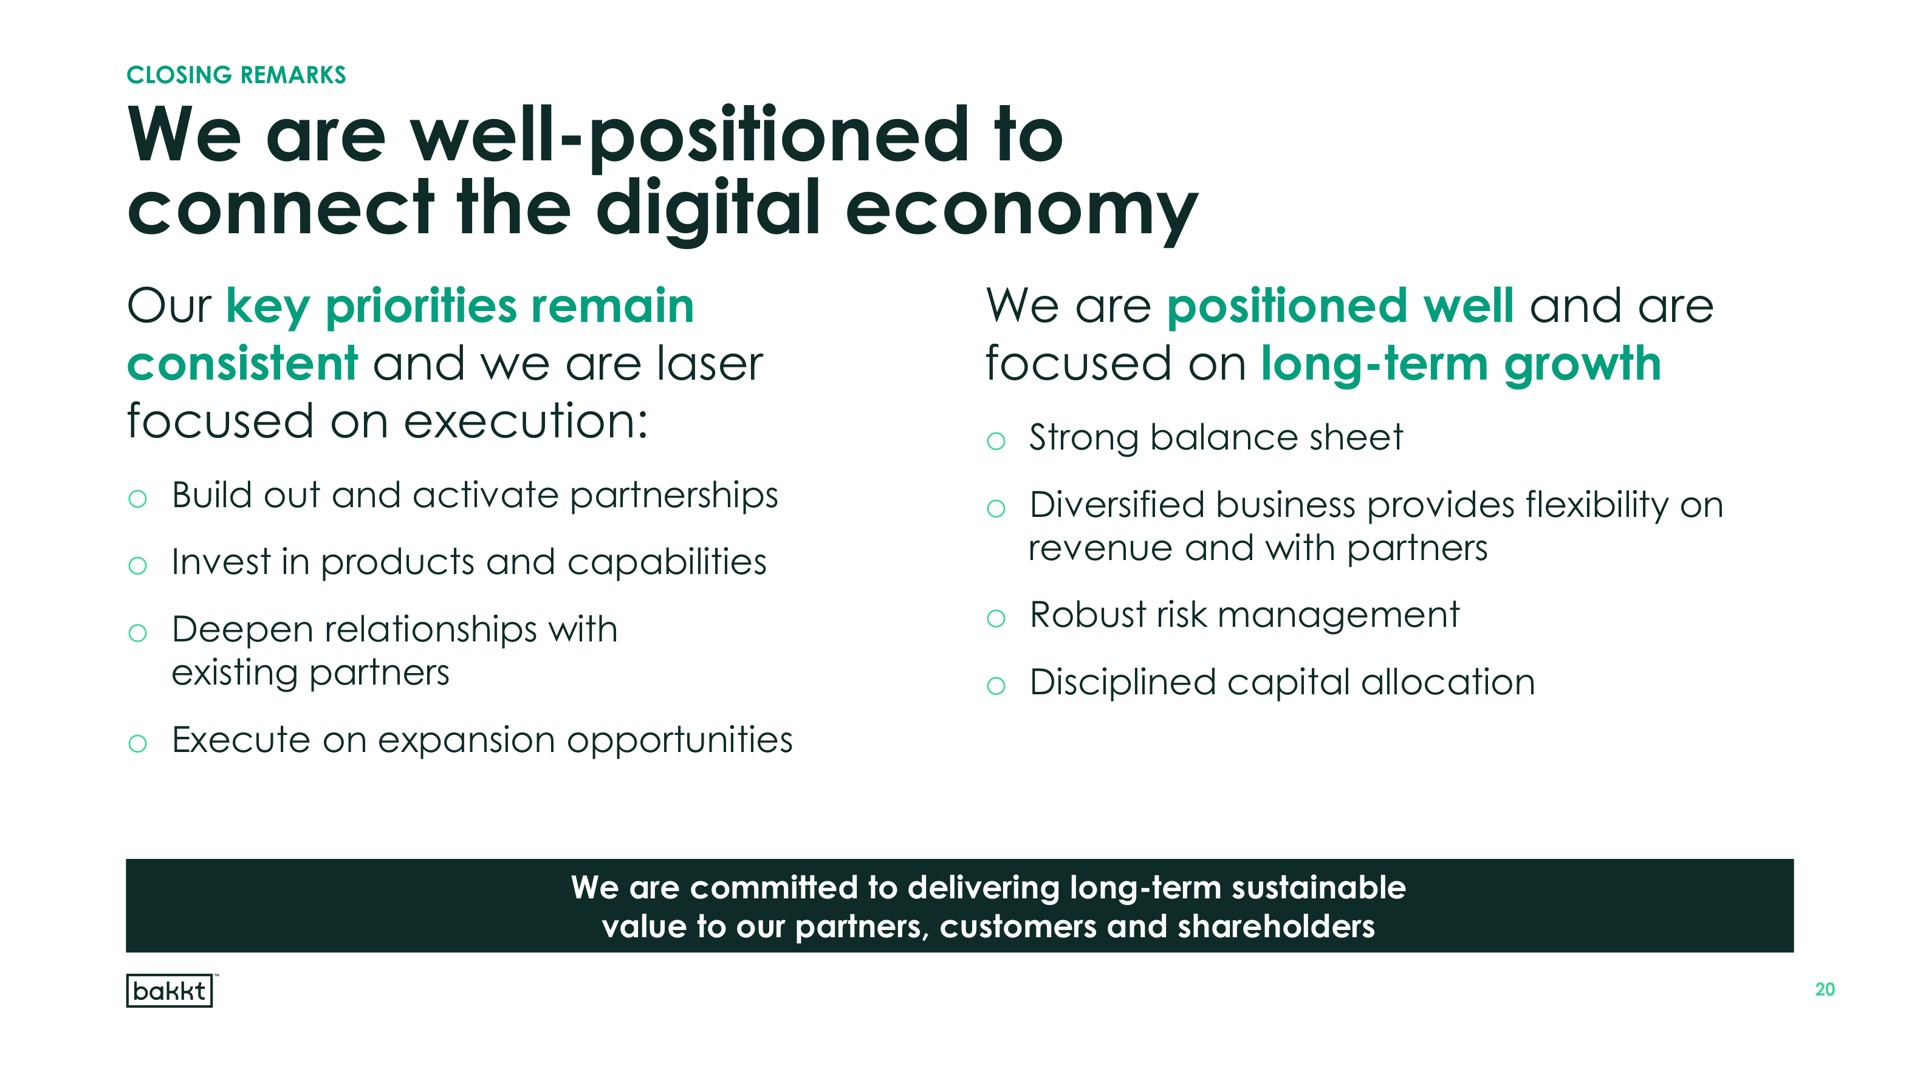 we are well positioned to connect the digital economy our key priorities remain consistent and we are laser focused on execution we are positioned well and are focused on long term growth strong balance sheet invest in products capabilities deepen relationships with revenue with partners robust risk management | Bakkt